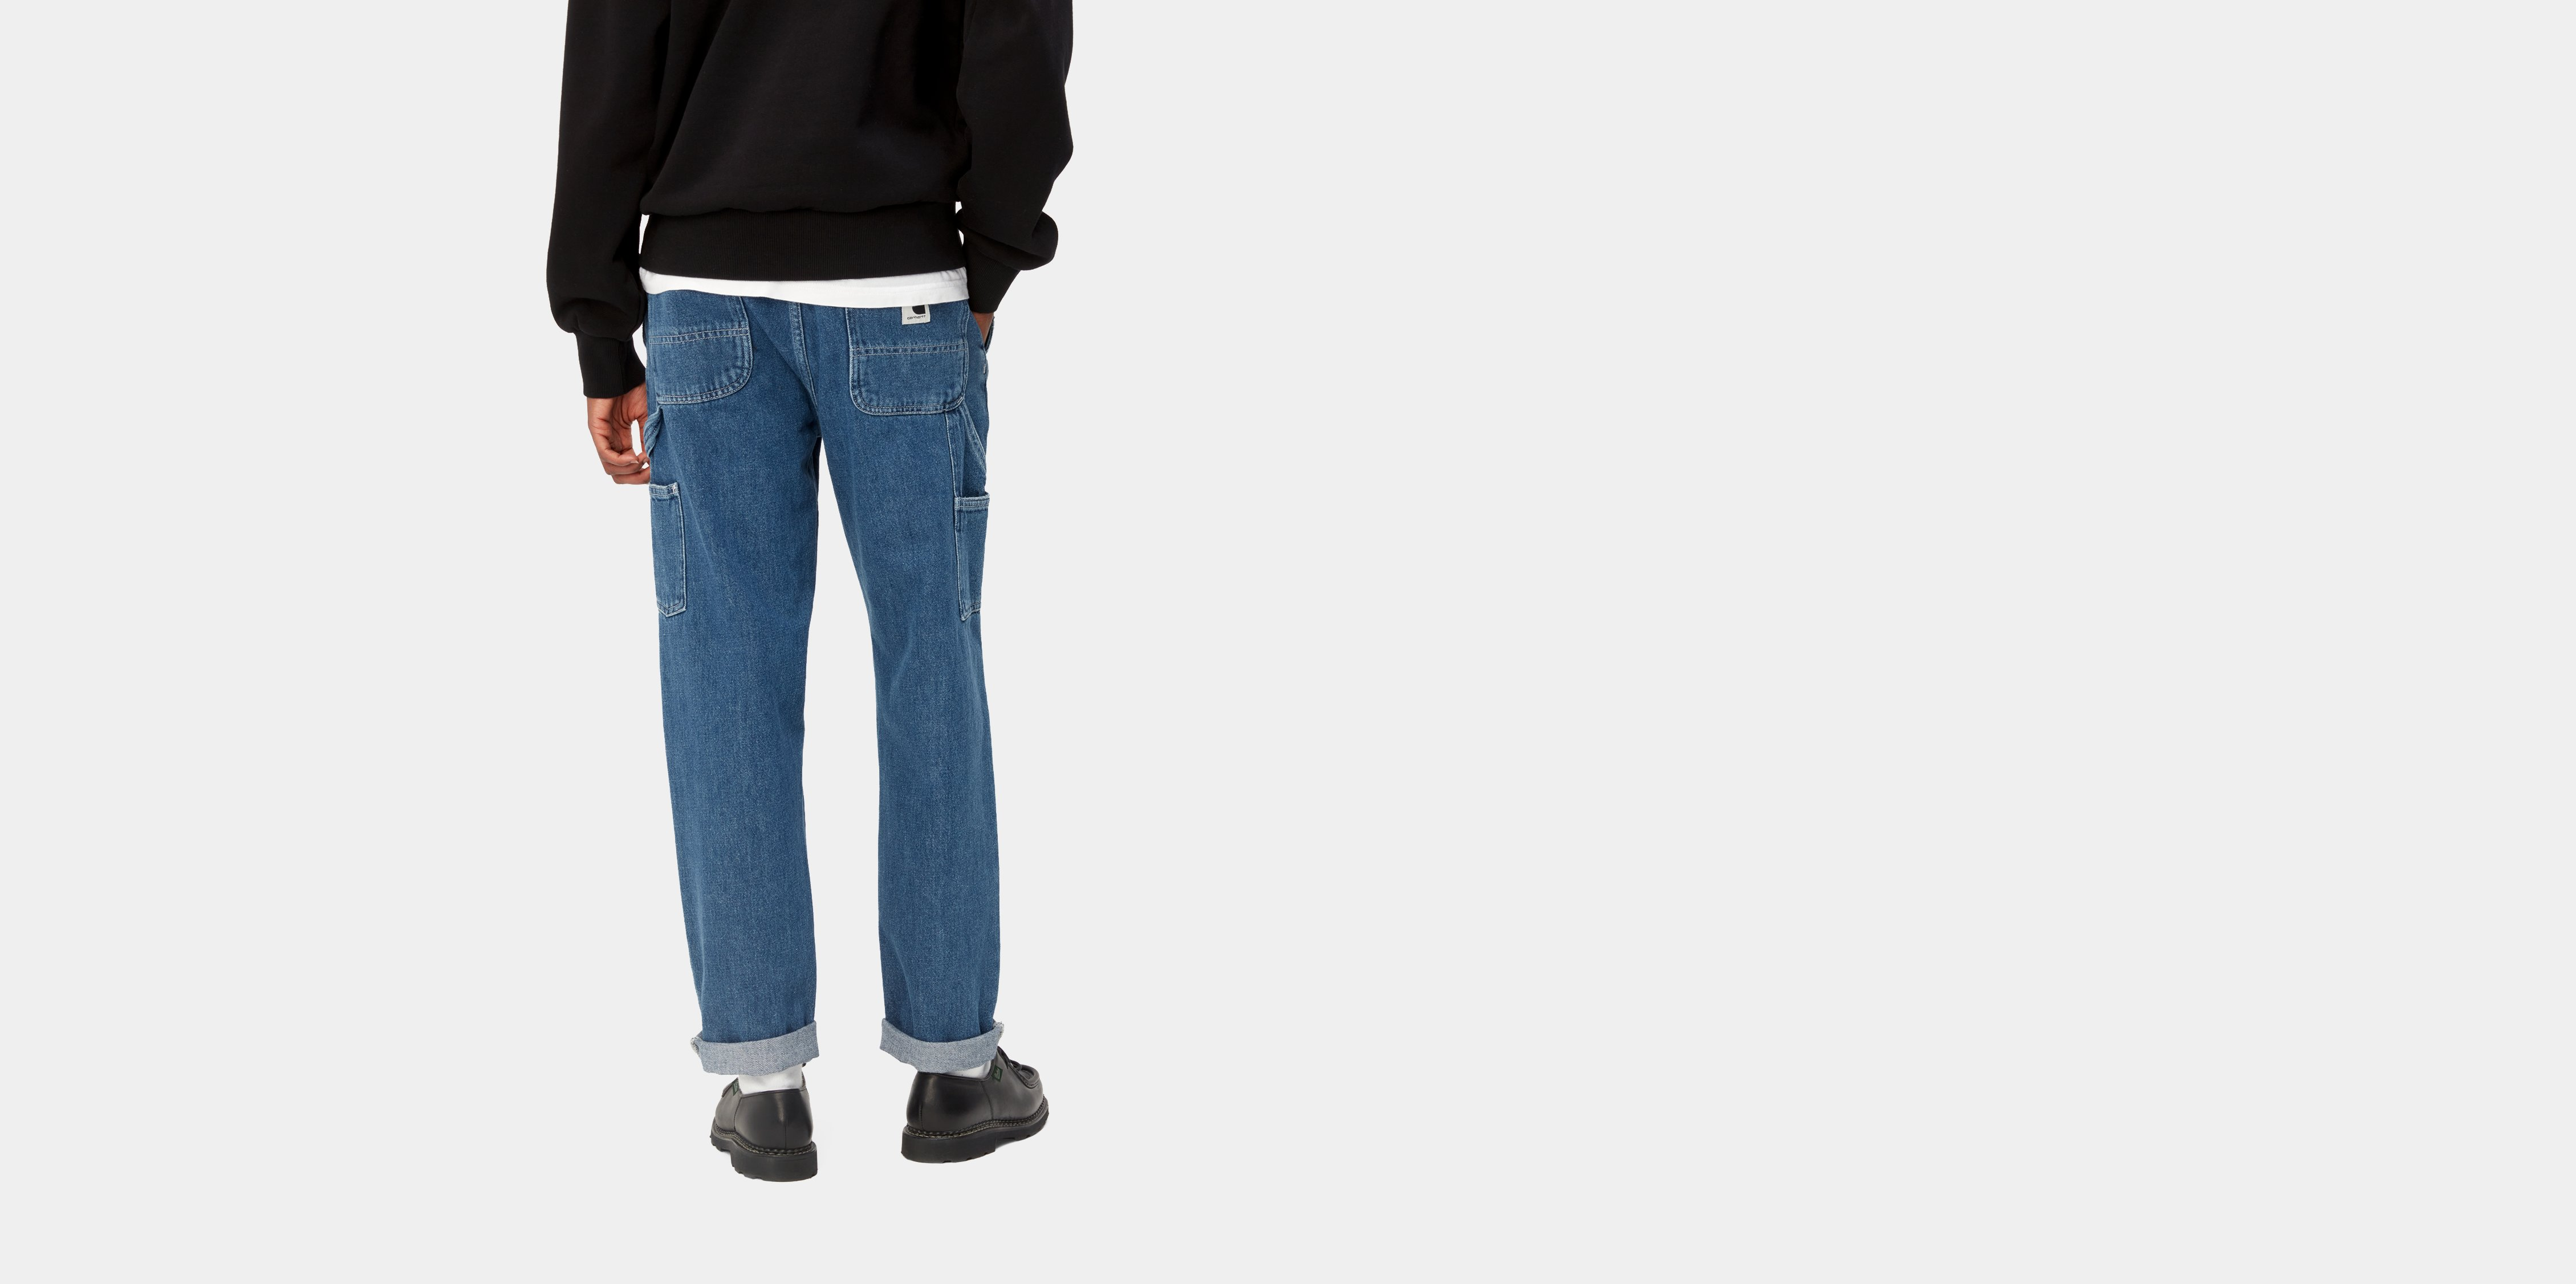 https://cdn.media.amplience.net/i/carhartt_wip/I025268_01_06-OF-02/w-pierce-pant-blue-stone-washed-1520.png?$pdp_03_mobile$